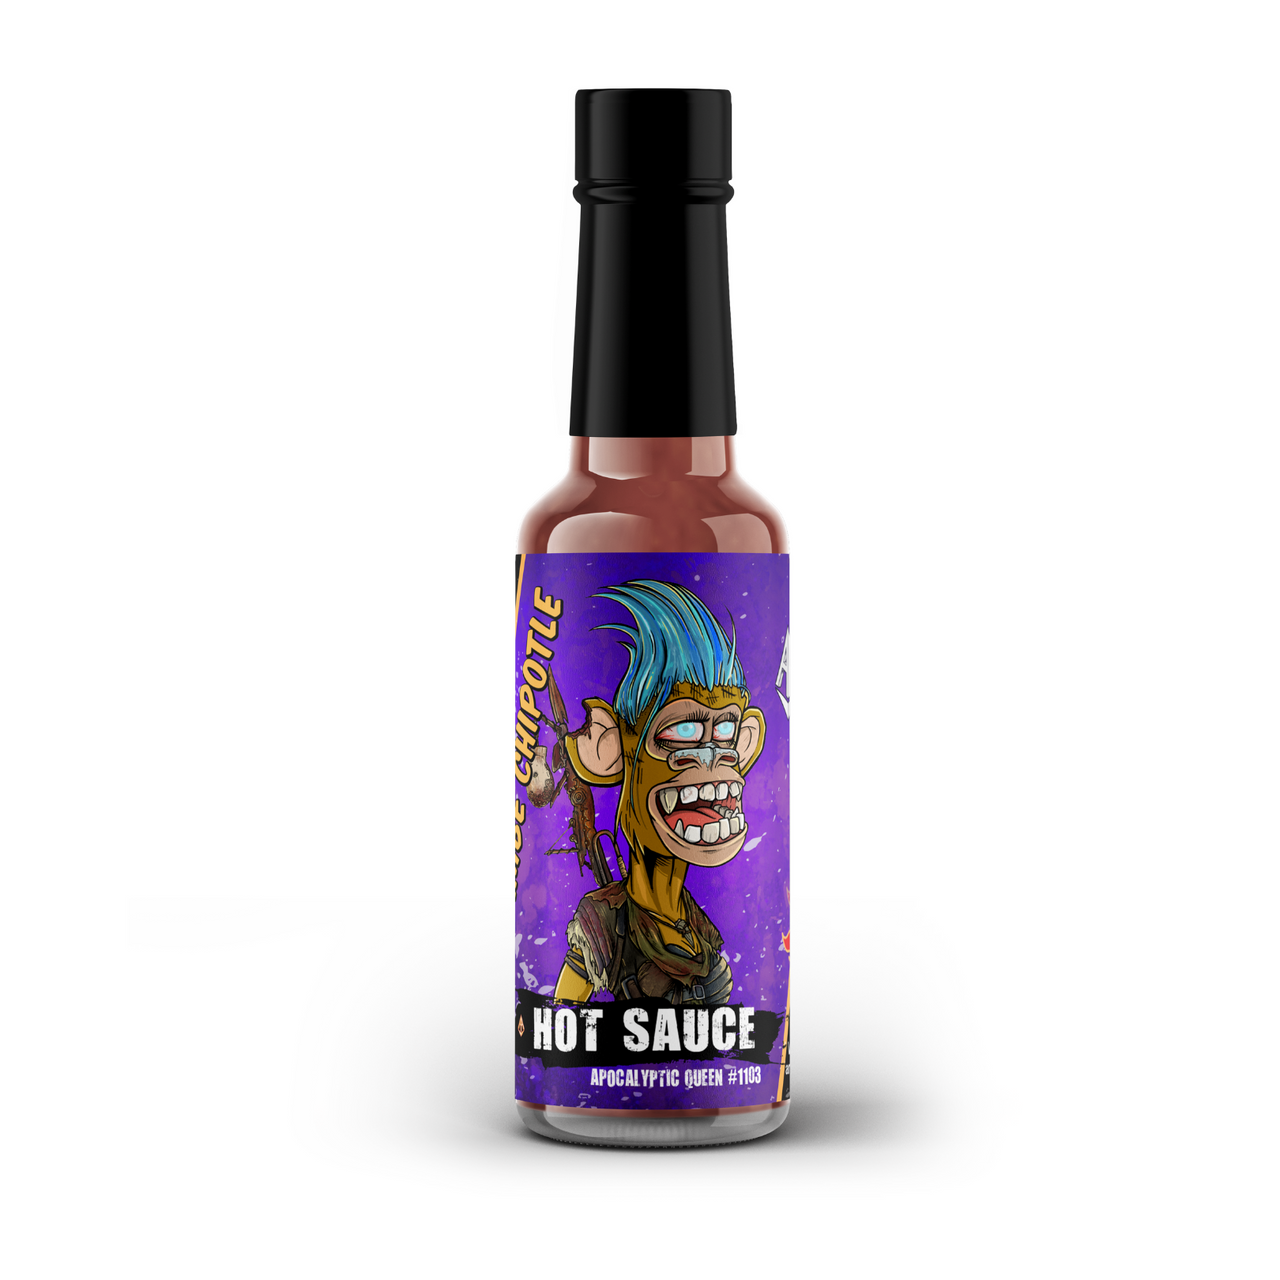 Apocalyptic Queen #1103 Harambe Chipotle Hot Sauce